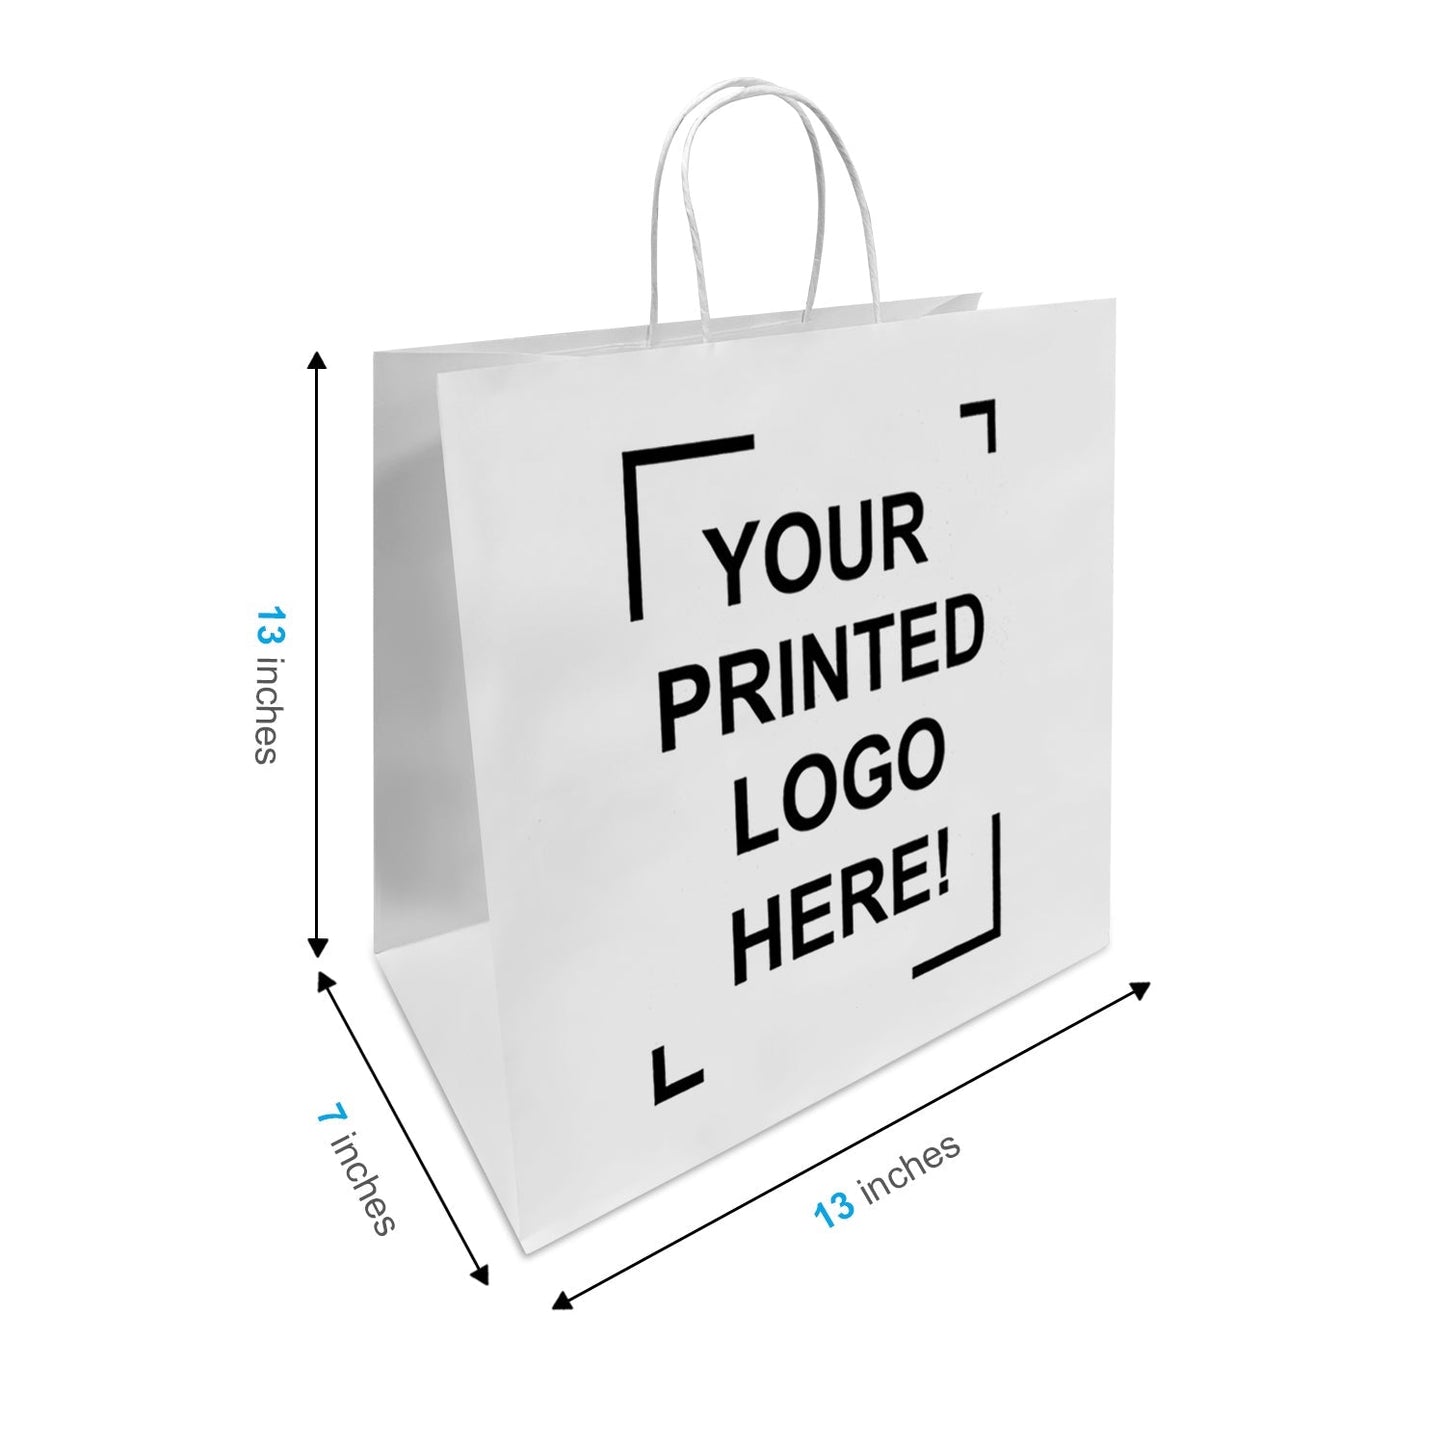 Custom Print Star 13x7x13 inches White Paper Bags Twisted Handles; $1.56/pc, 2 Sides Full Color Print, 250pcs/case, Printed in North America